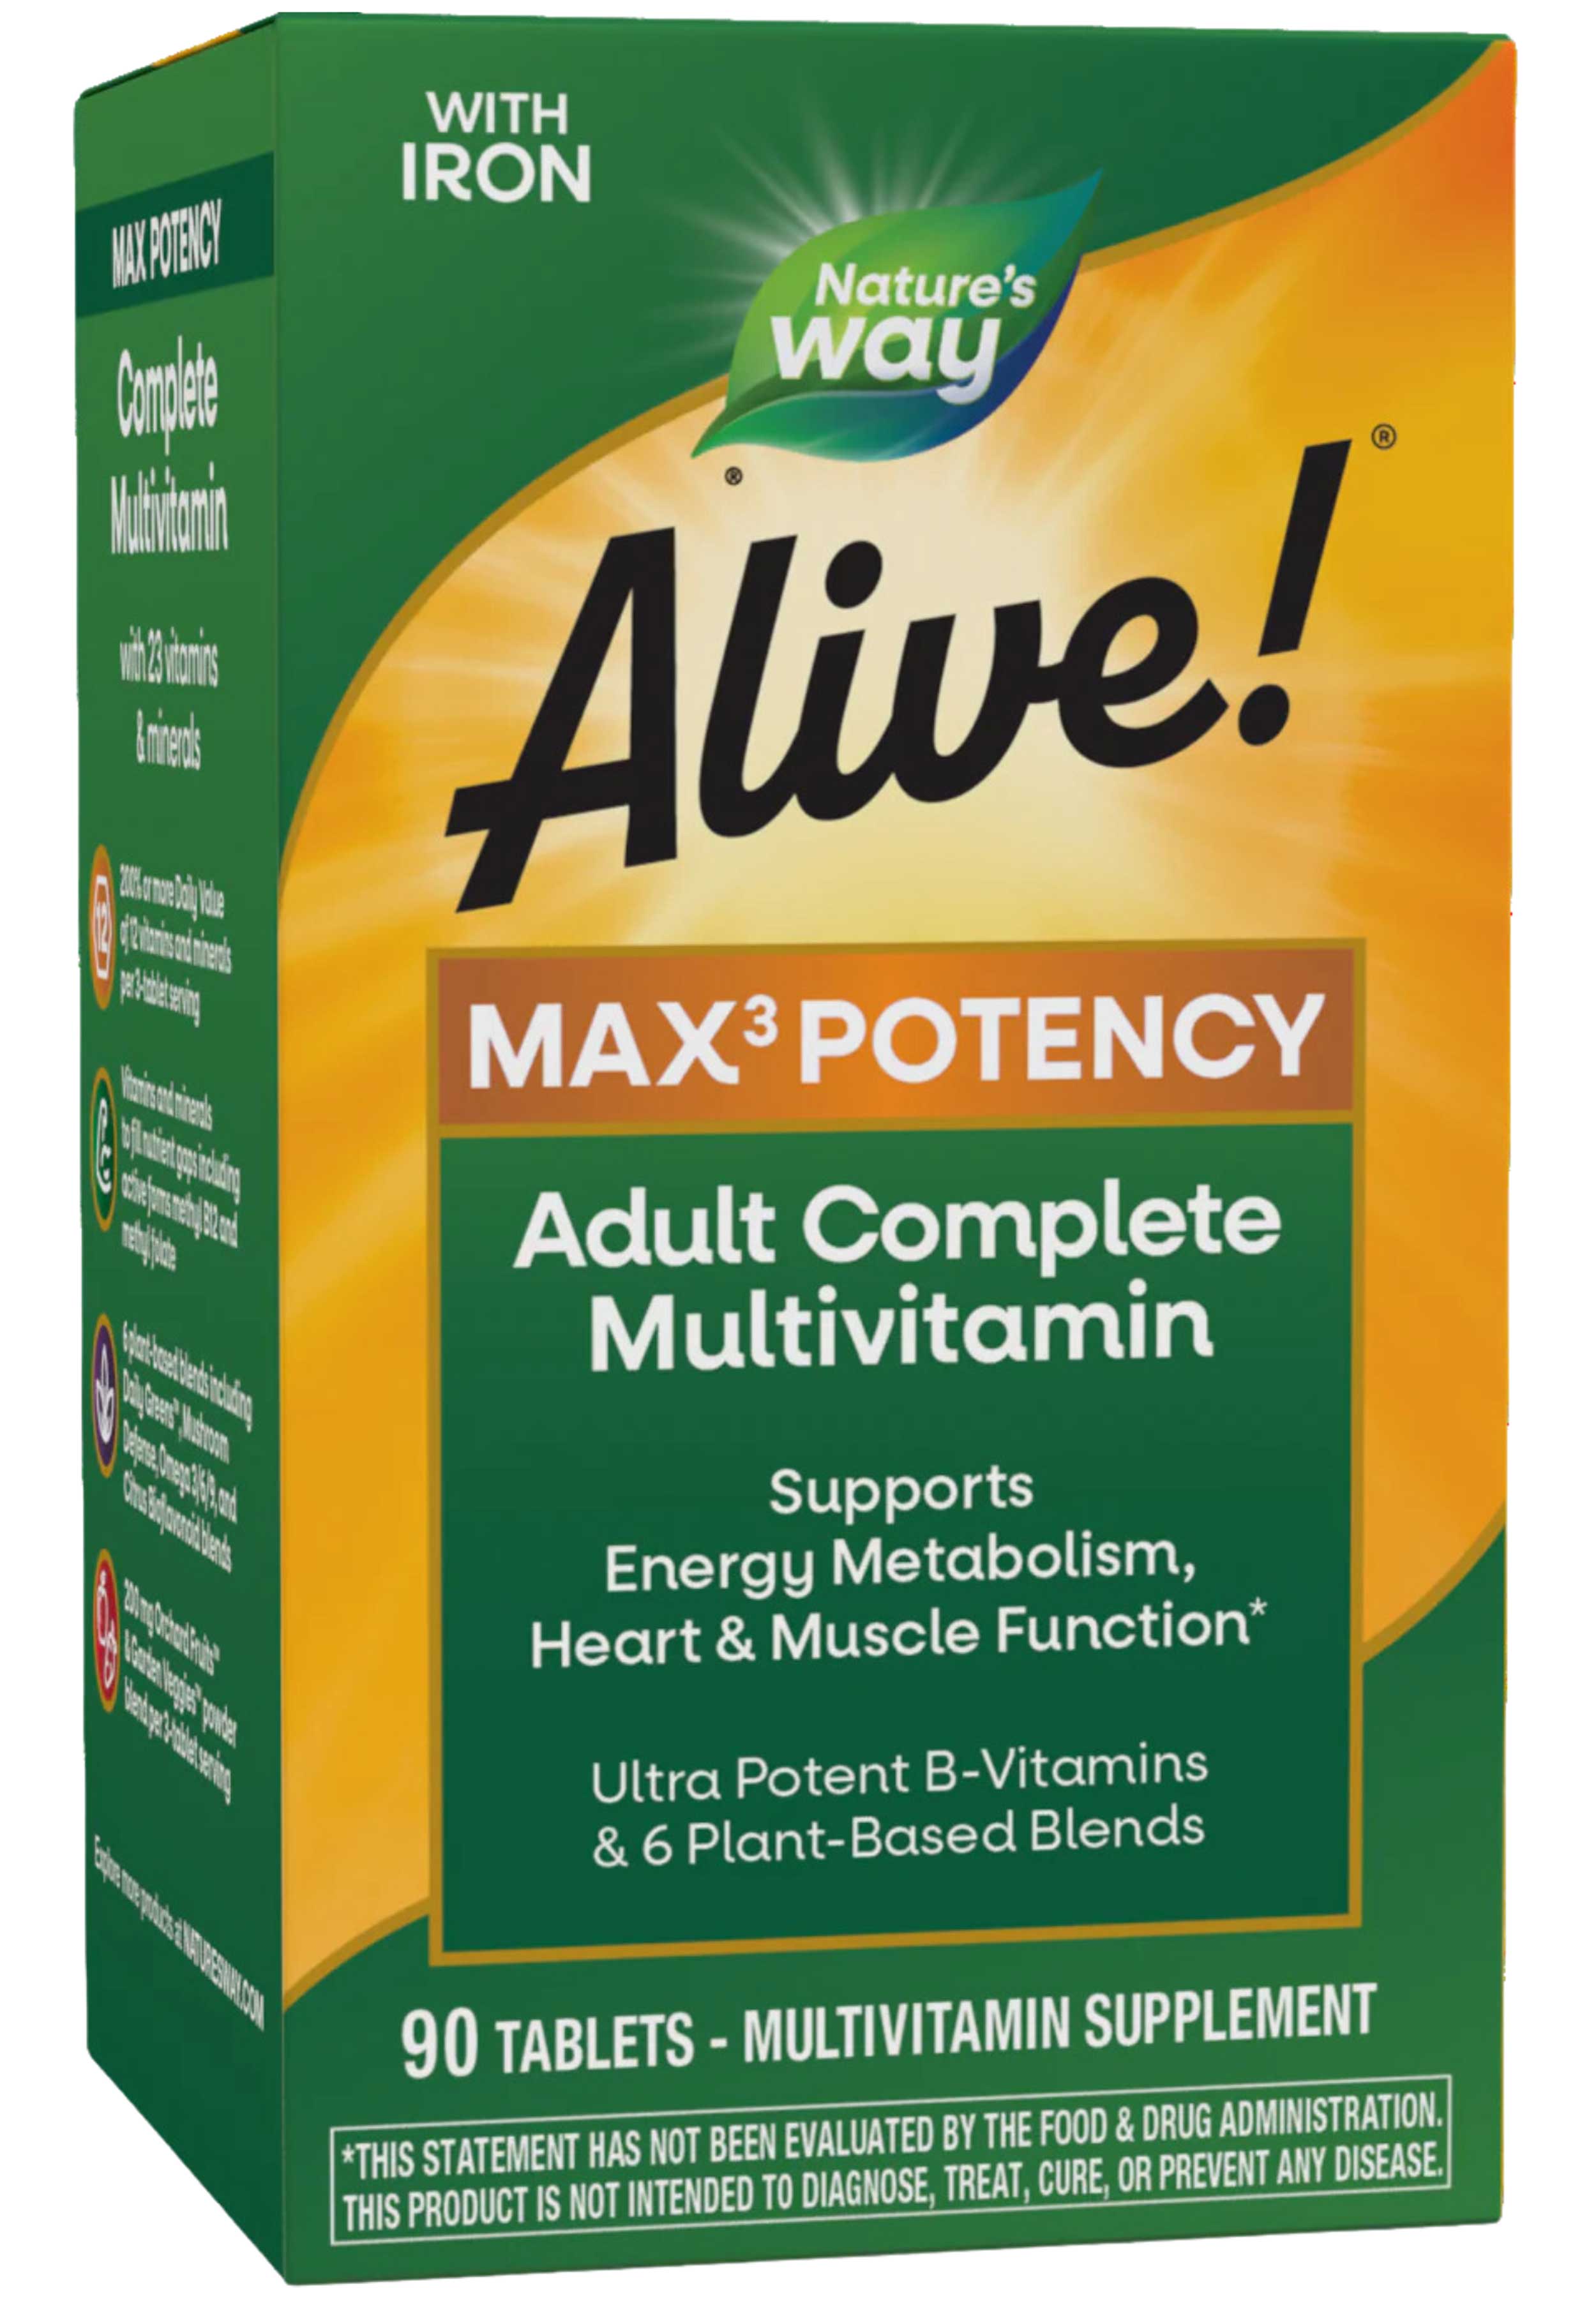 Nature's Way Alive! Max3 Potency Multivitamin (with iron)